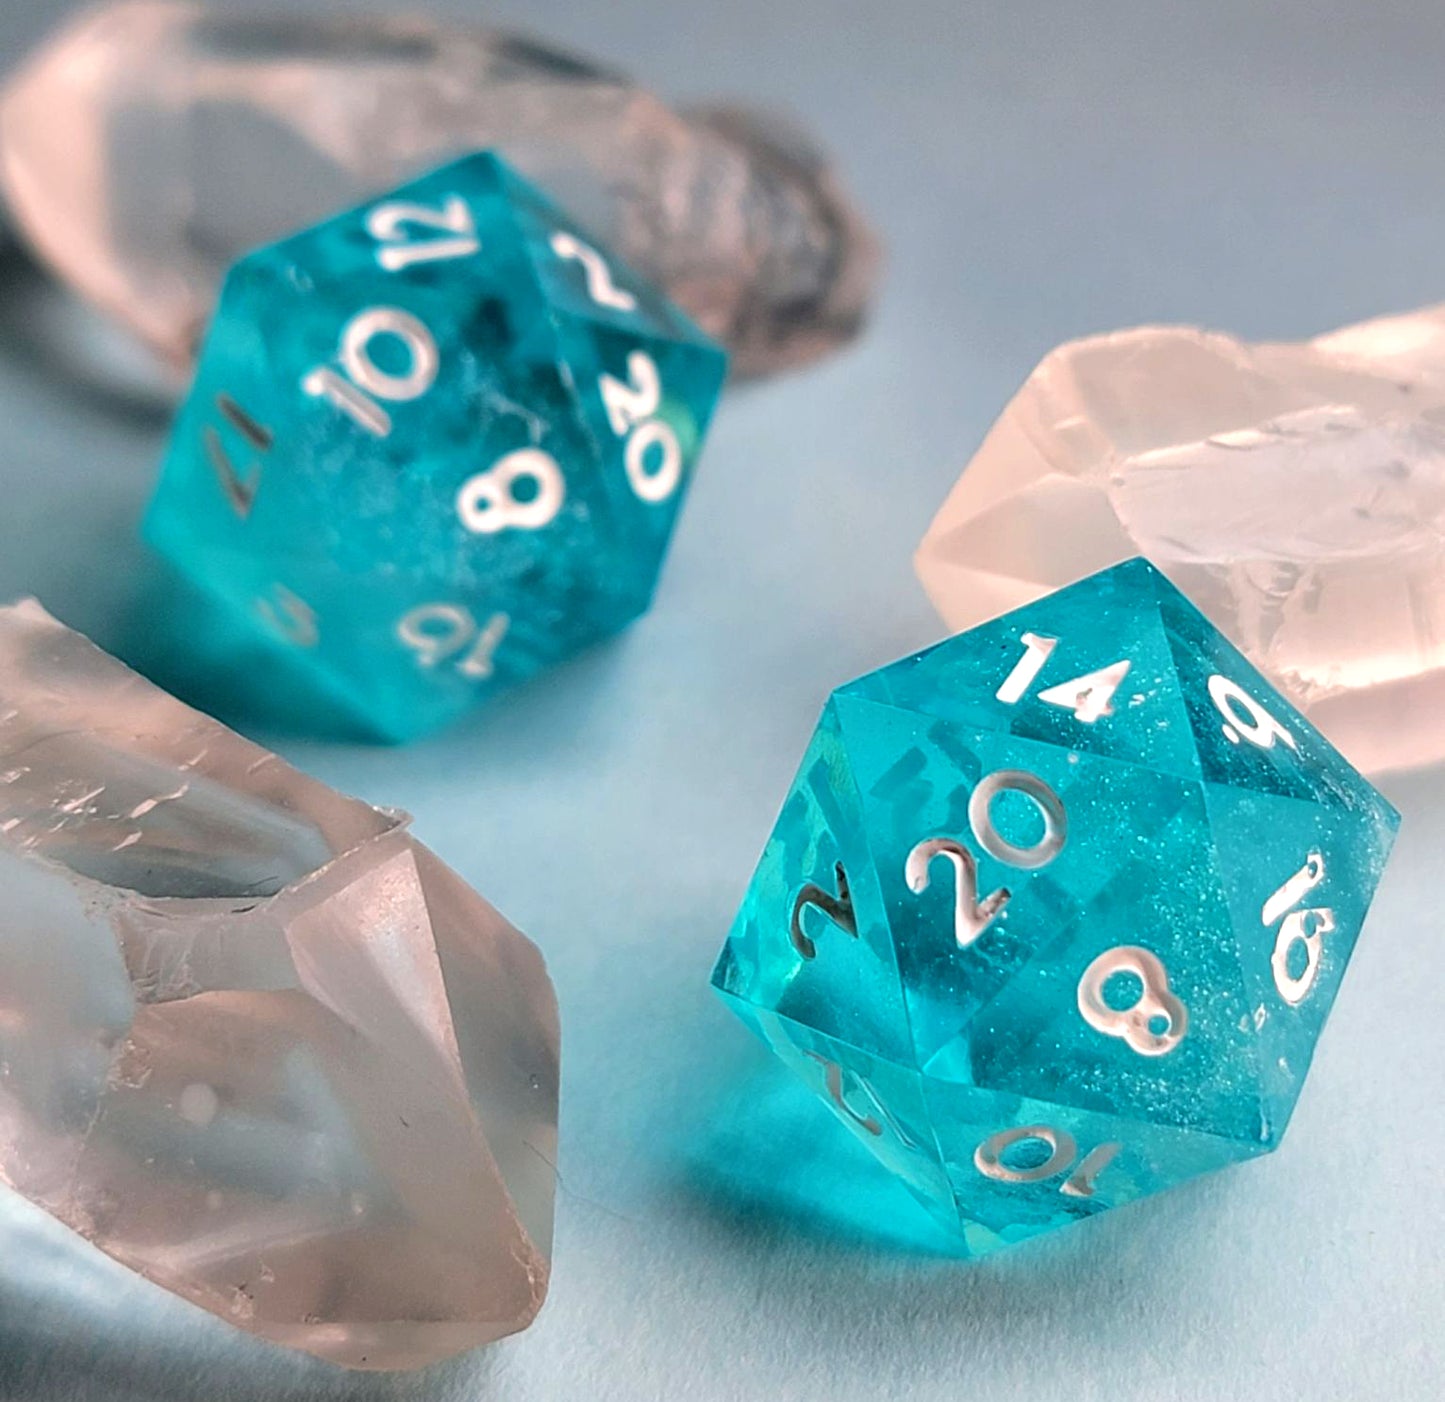 Eira -1 D20 | Handmade Dice | Hand Crafted Dungeons and Dragons Dice